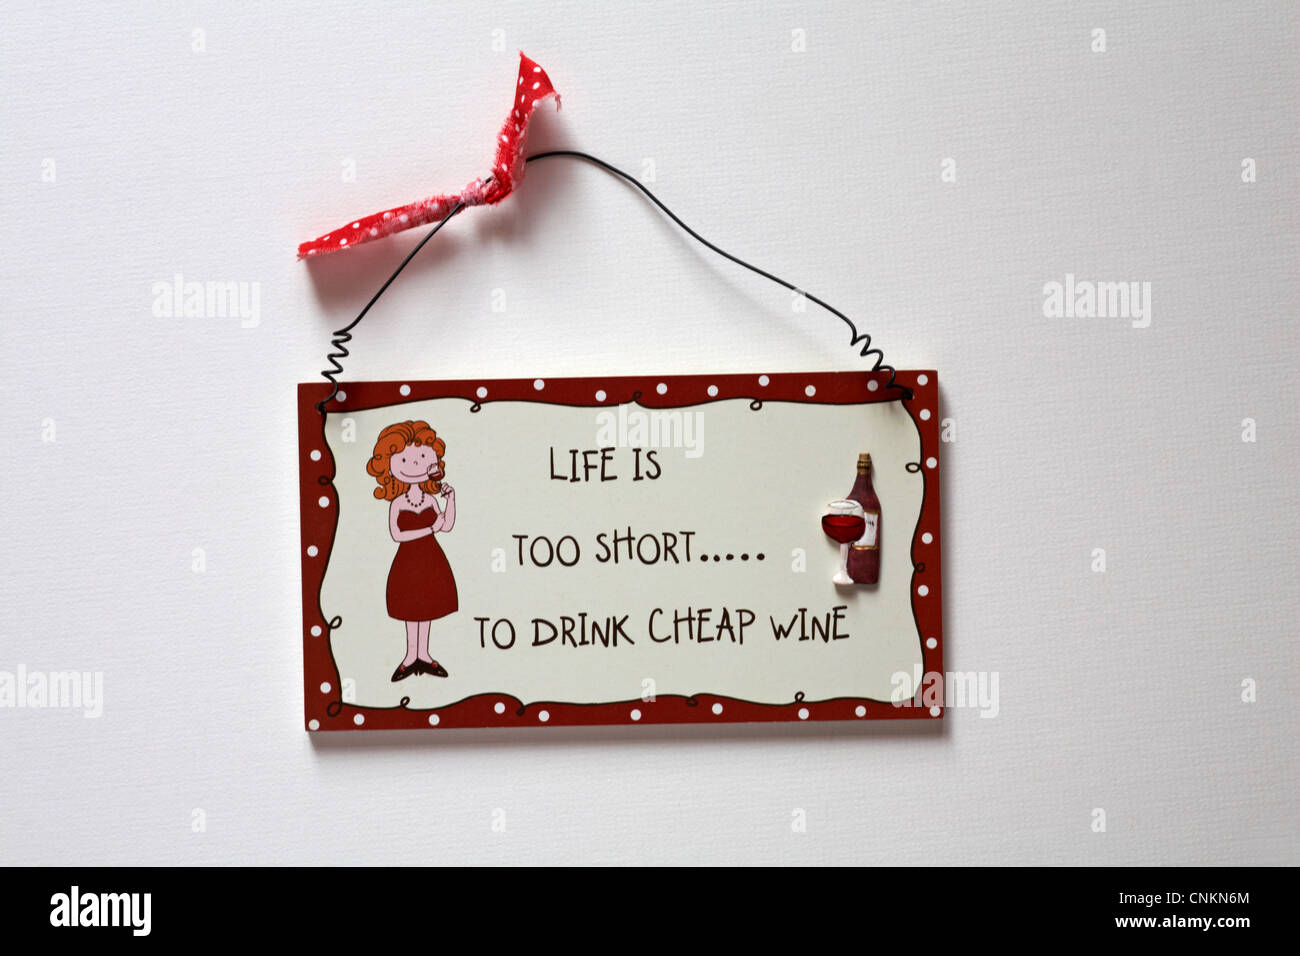 Life is too short ... to drink cheap wine hanging plaque isolated on white background Stock Photo